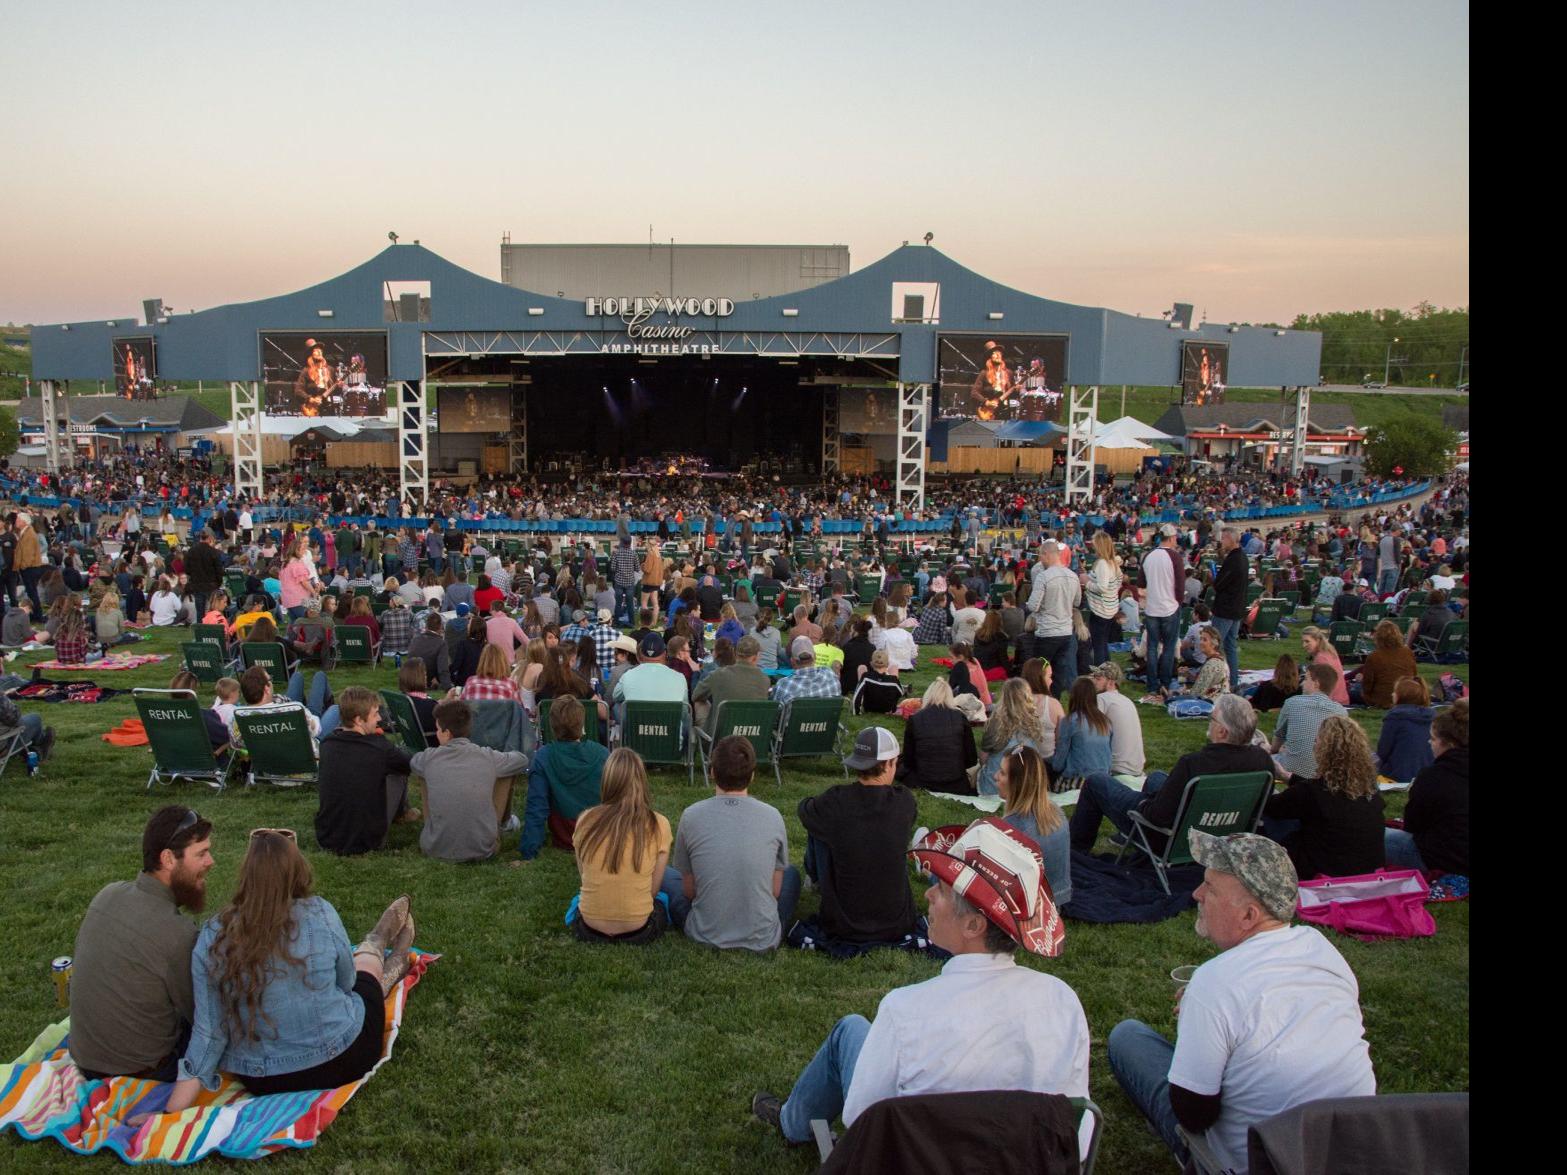 Hollywood casino amphitheater concerts 2020